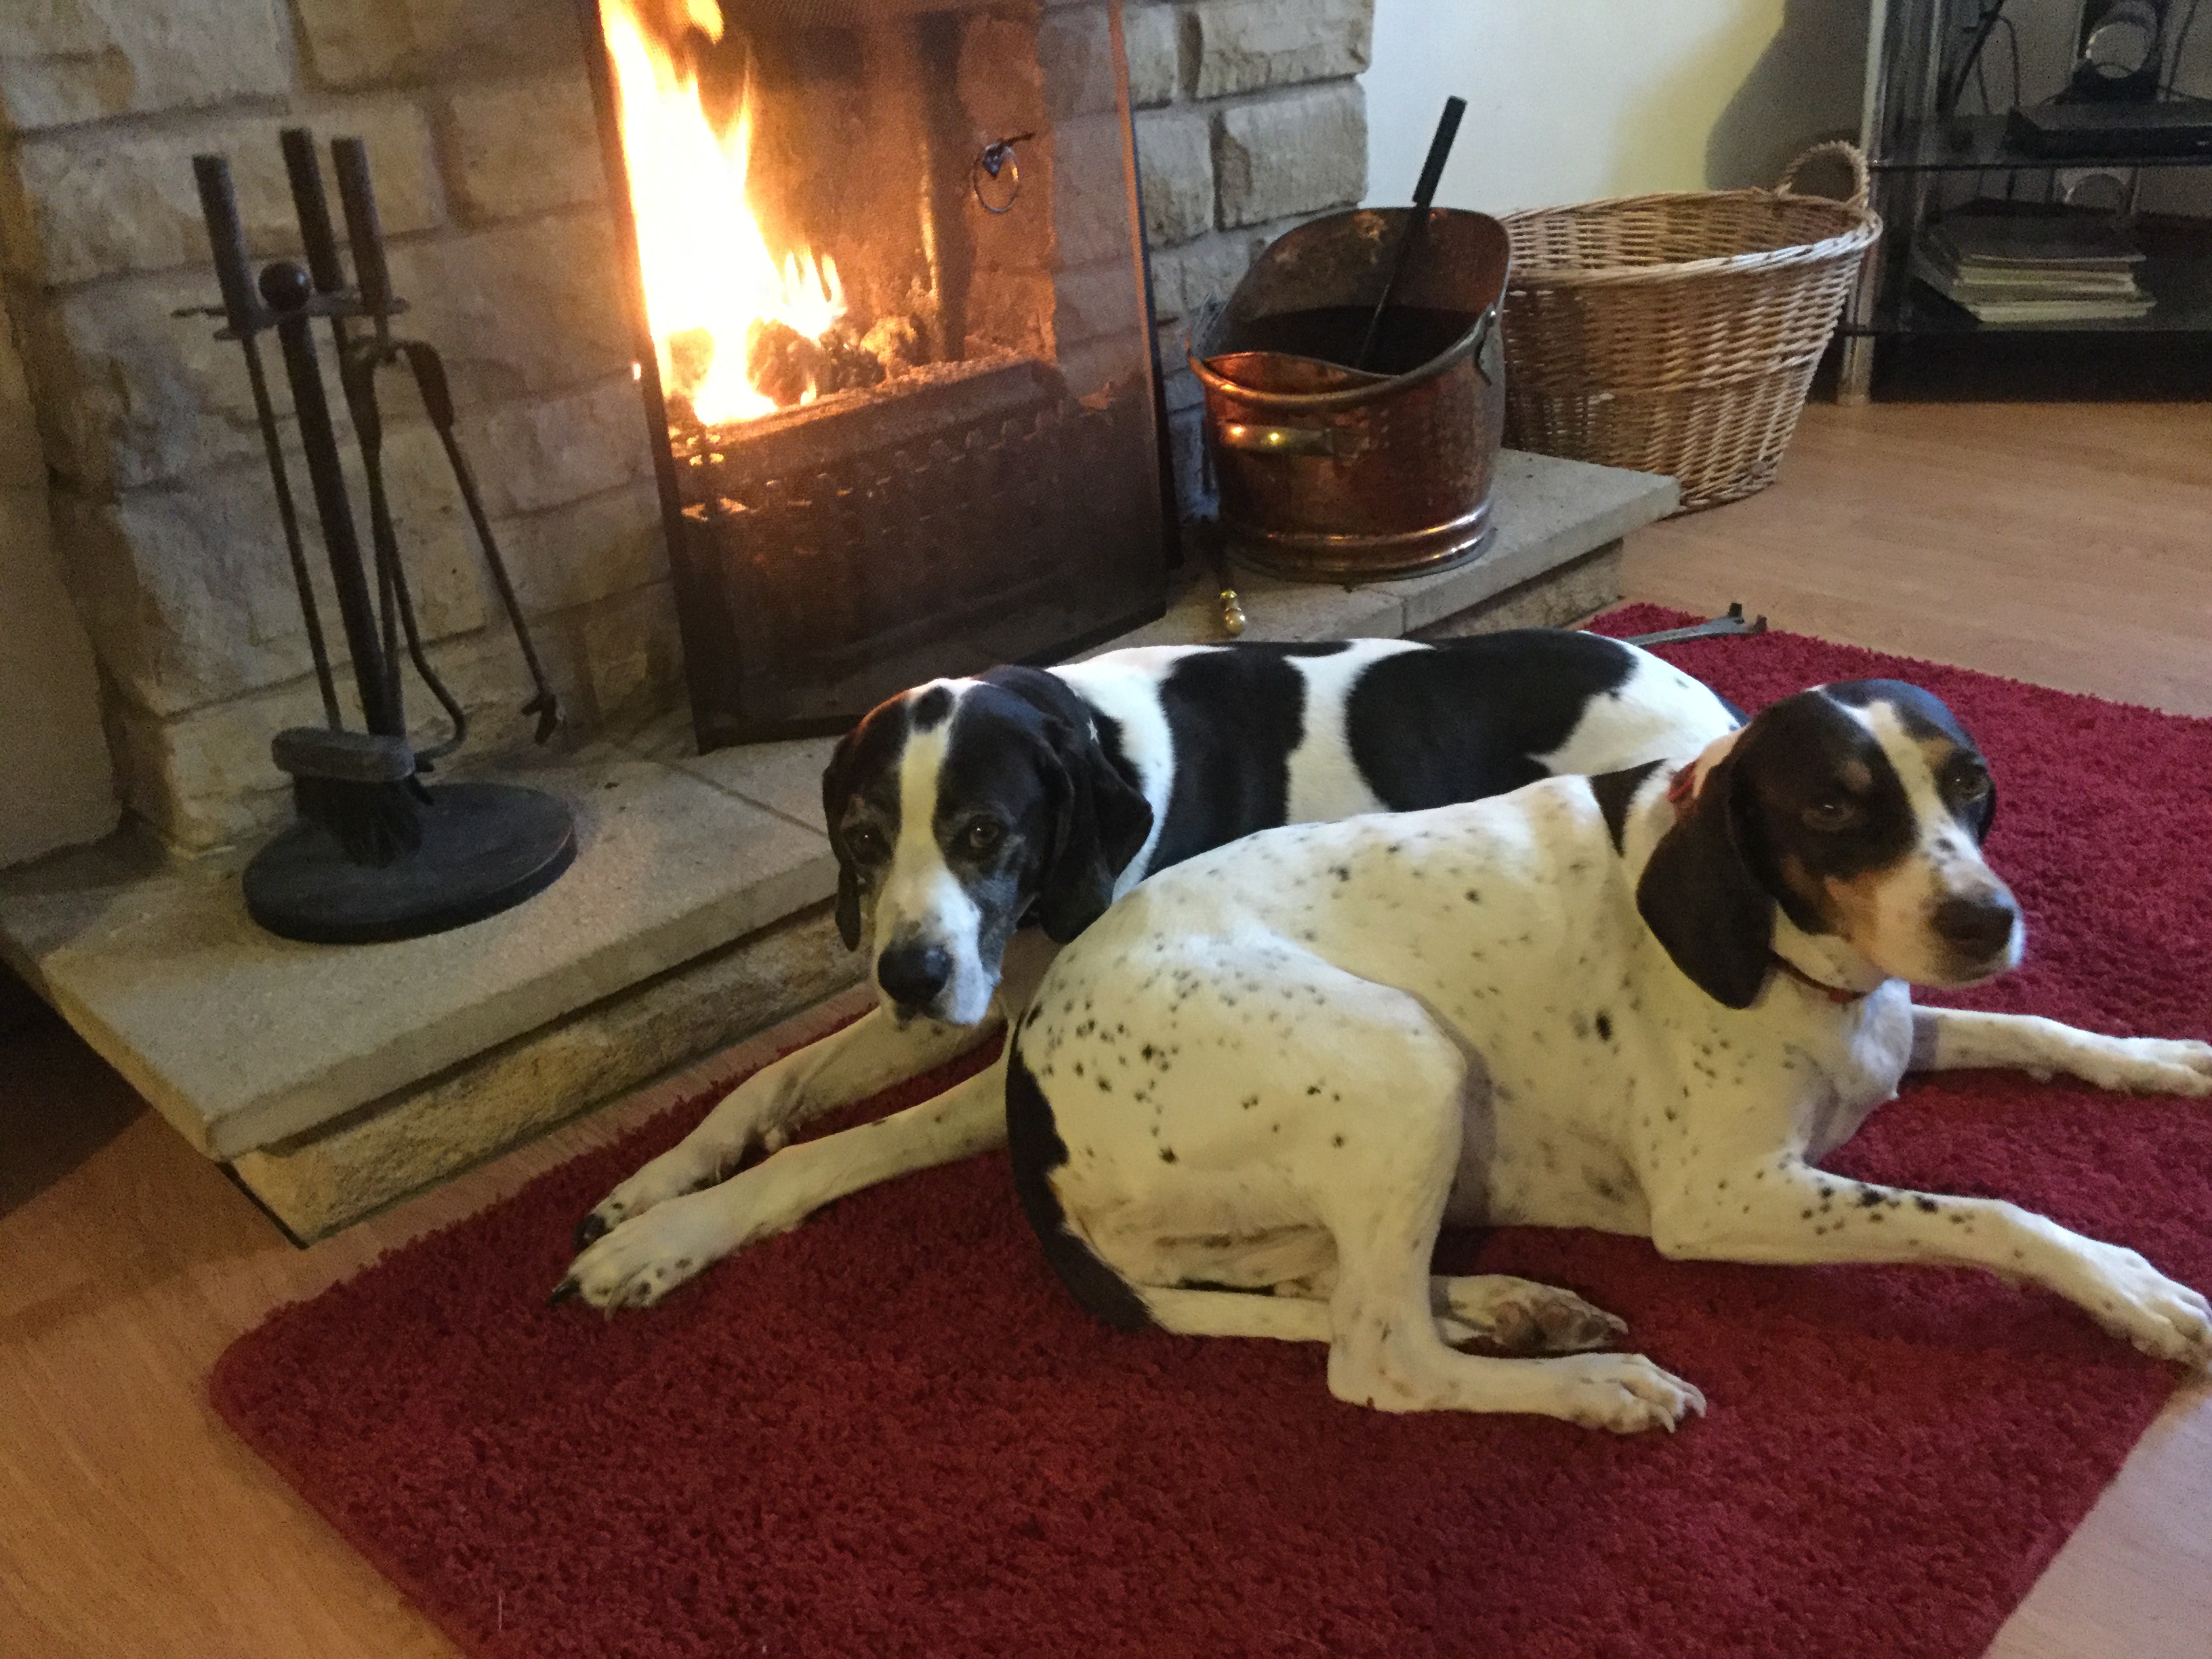 Guest dogs love the fire